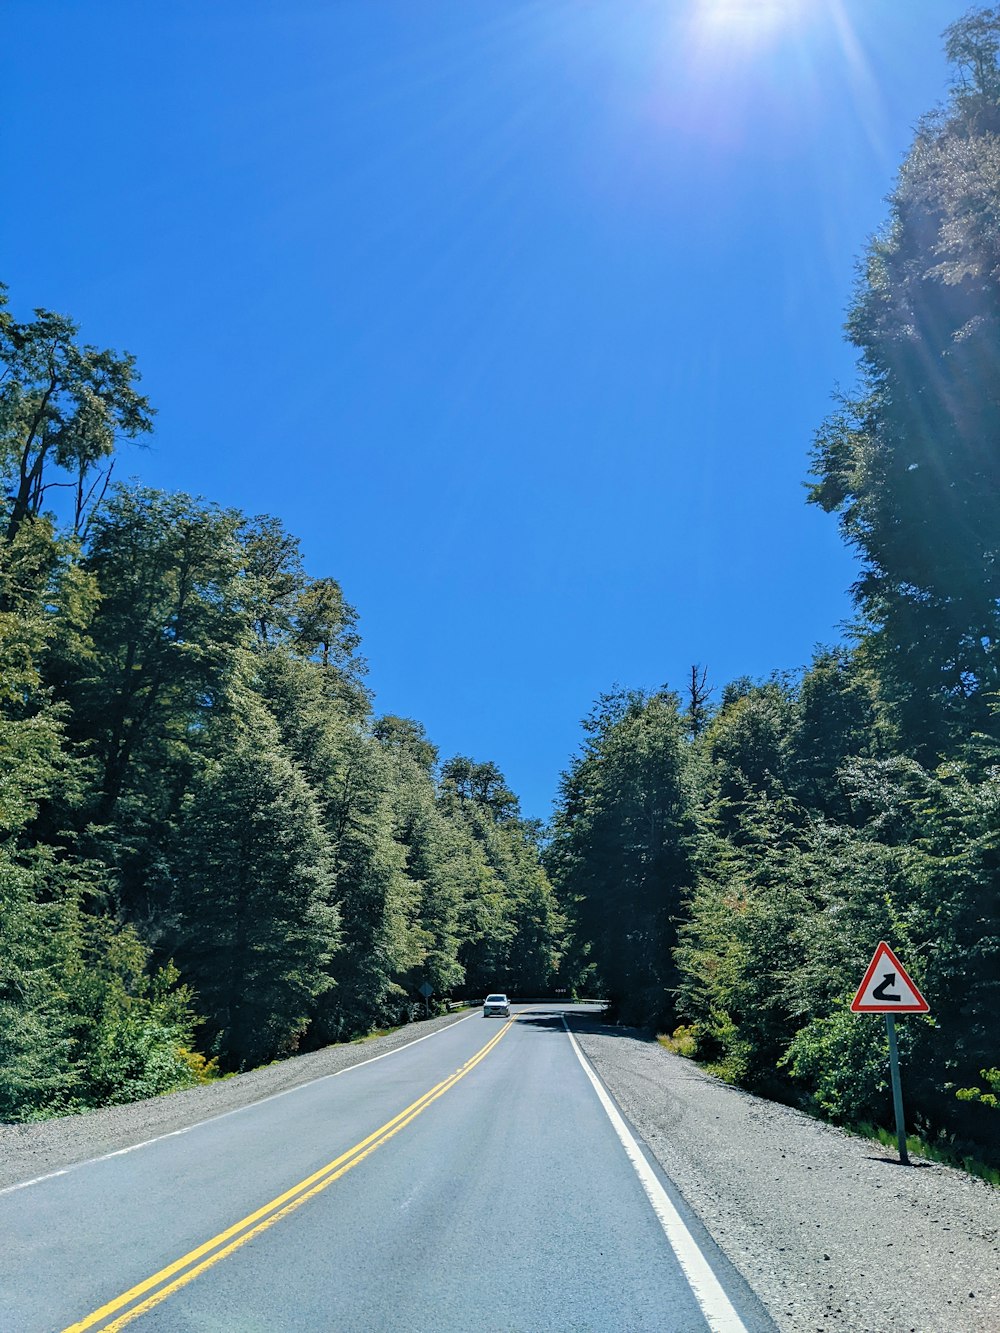 the sun shines brightly on a road surrounded by trees